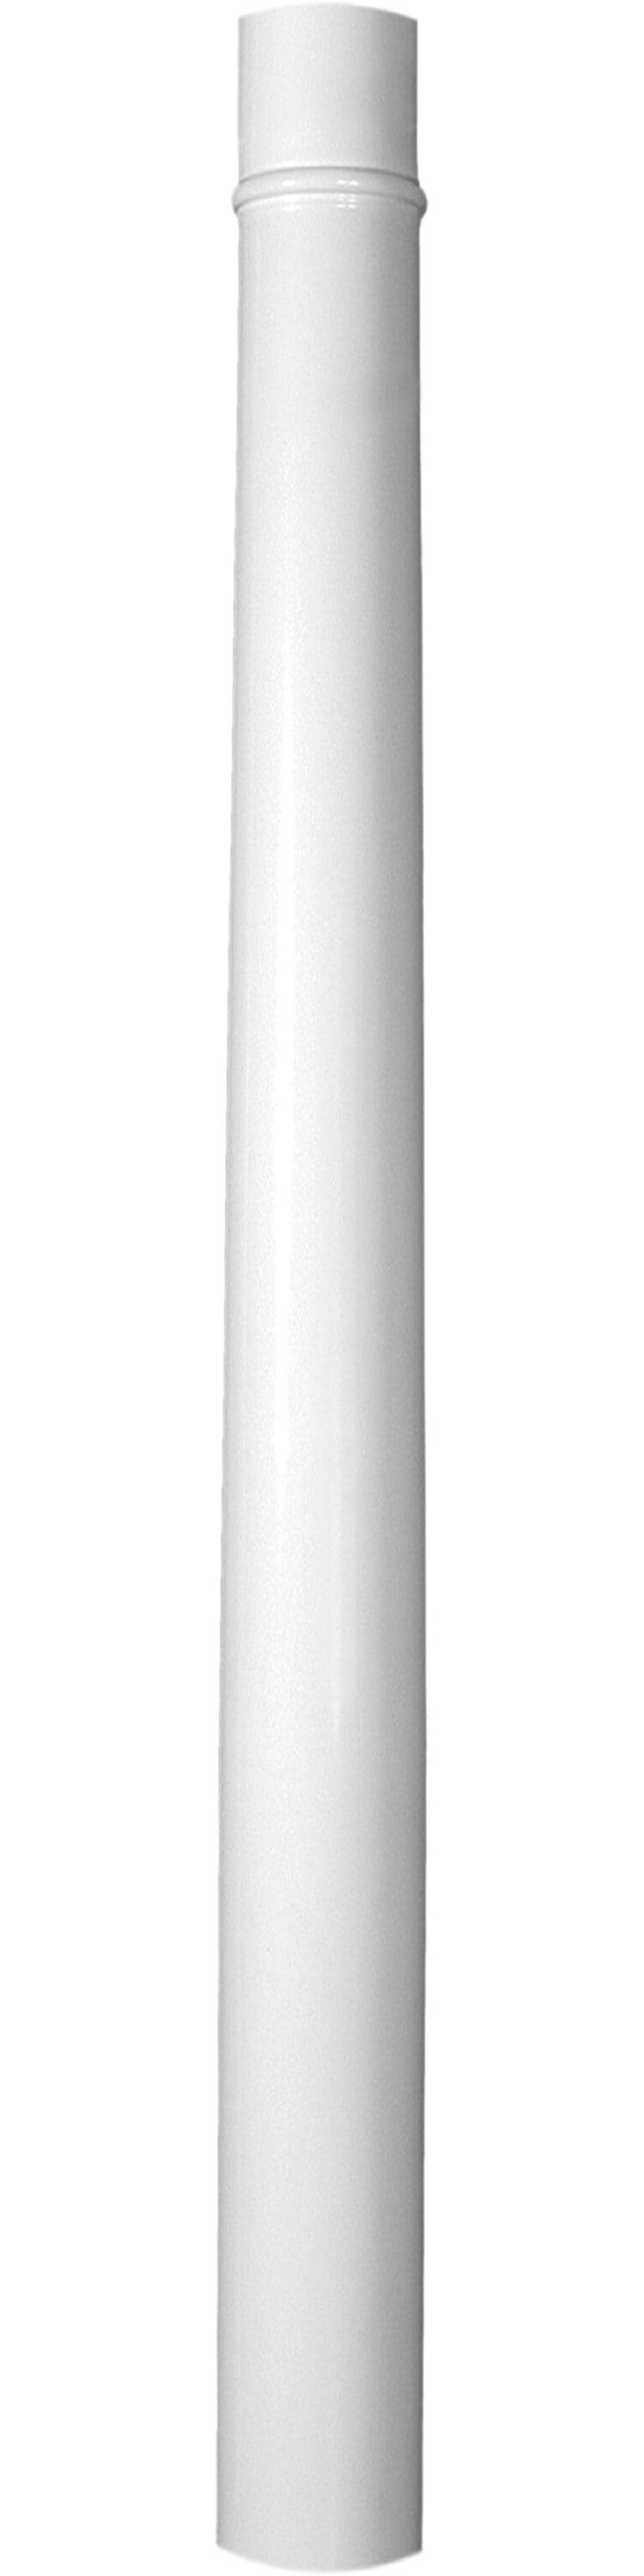 Pole-Wrap 96 in. x 16 in. Unfinished Oak Basement Column Cover with 4 in.  Cap and Base Trim